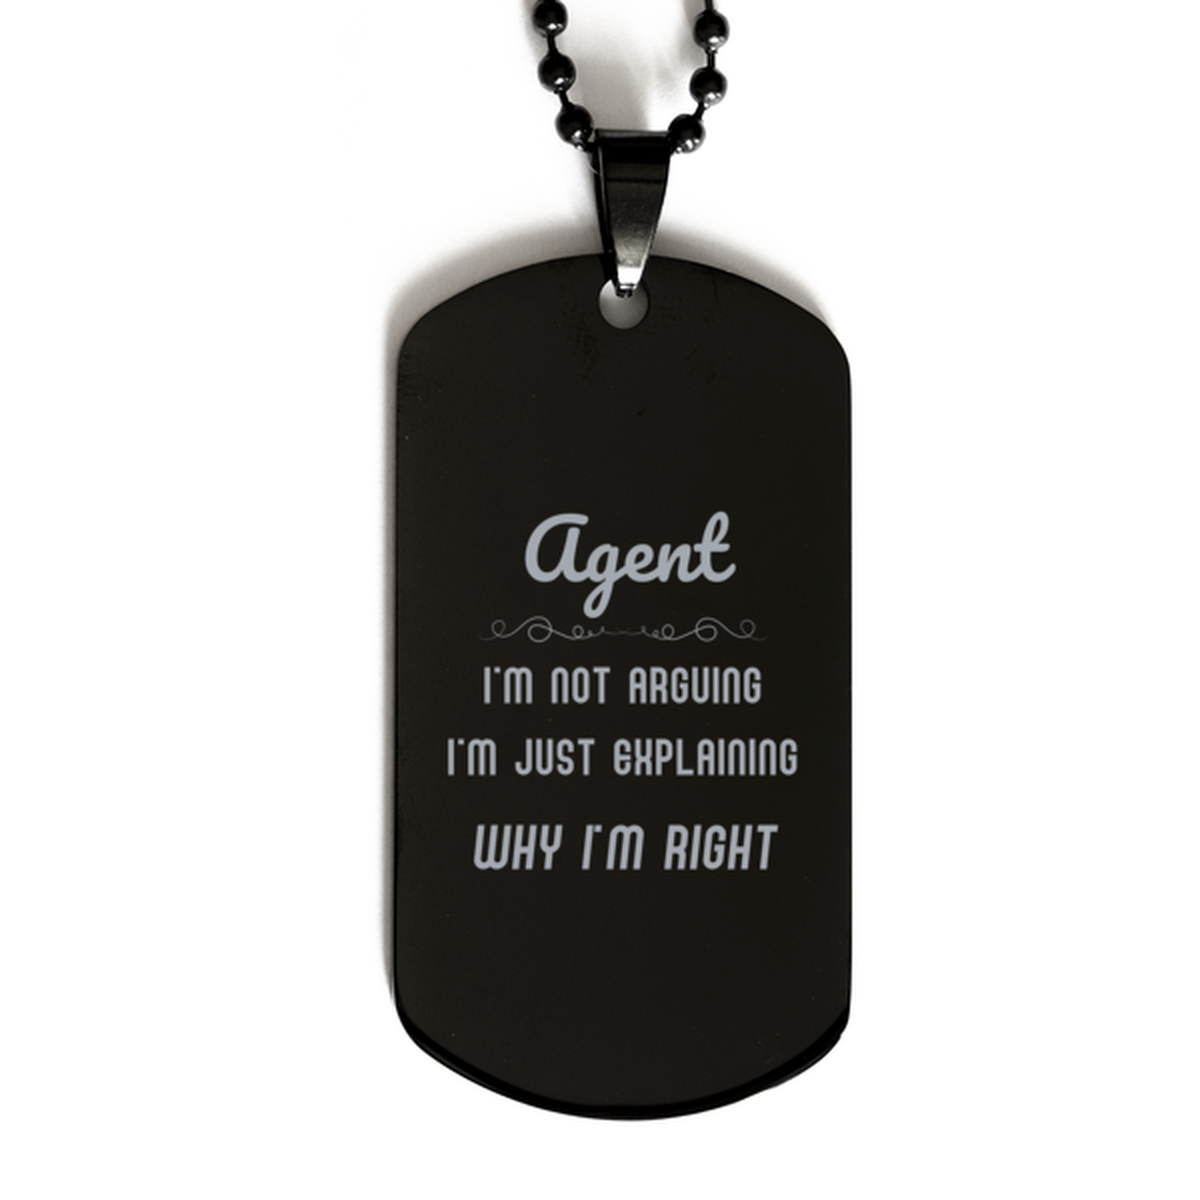 Agent I'm not Arguing. I'm Just Explaining Why I'm RIGHT Black Dog Tag, Funny Saying Quote Agent Gifts For Agent Graduation Birthday Christmas Gifts for Men Women Coworker